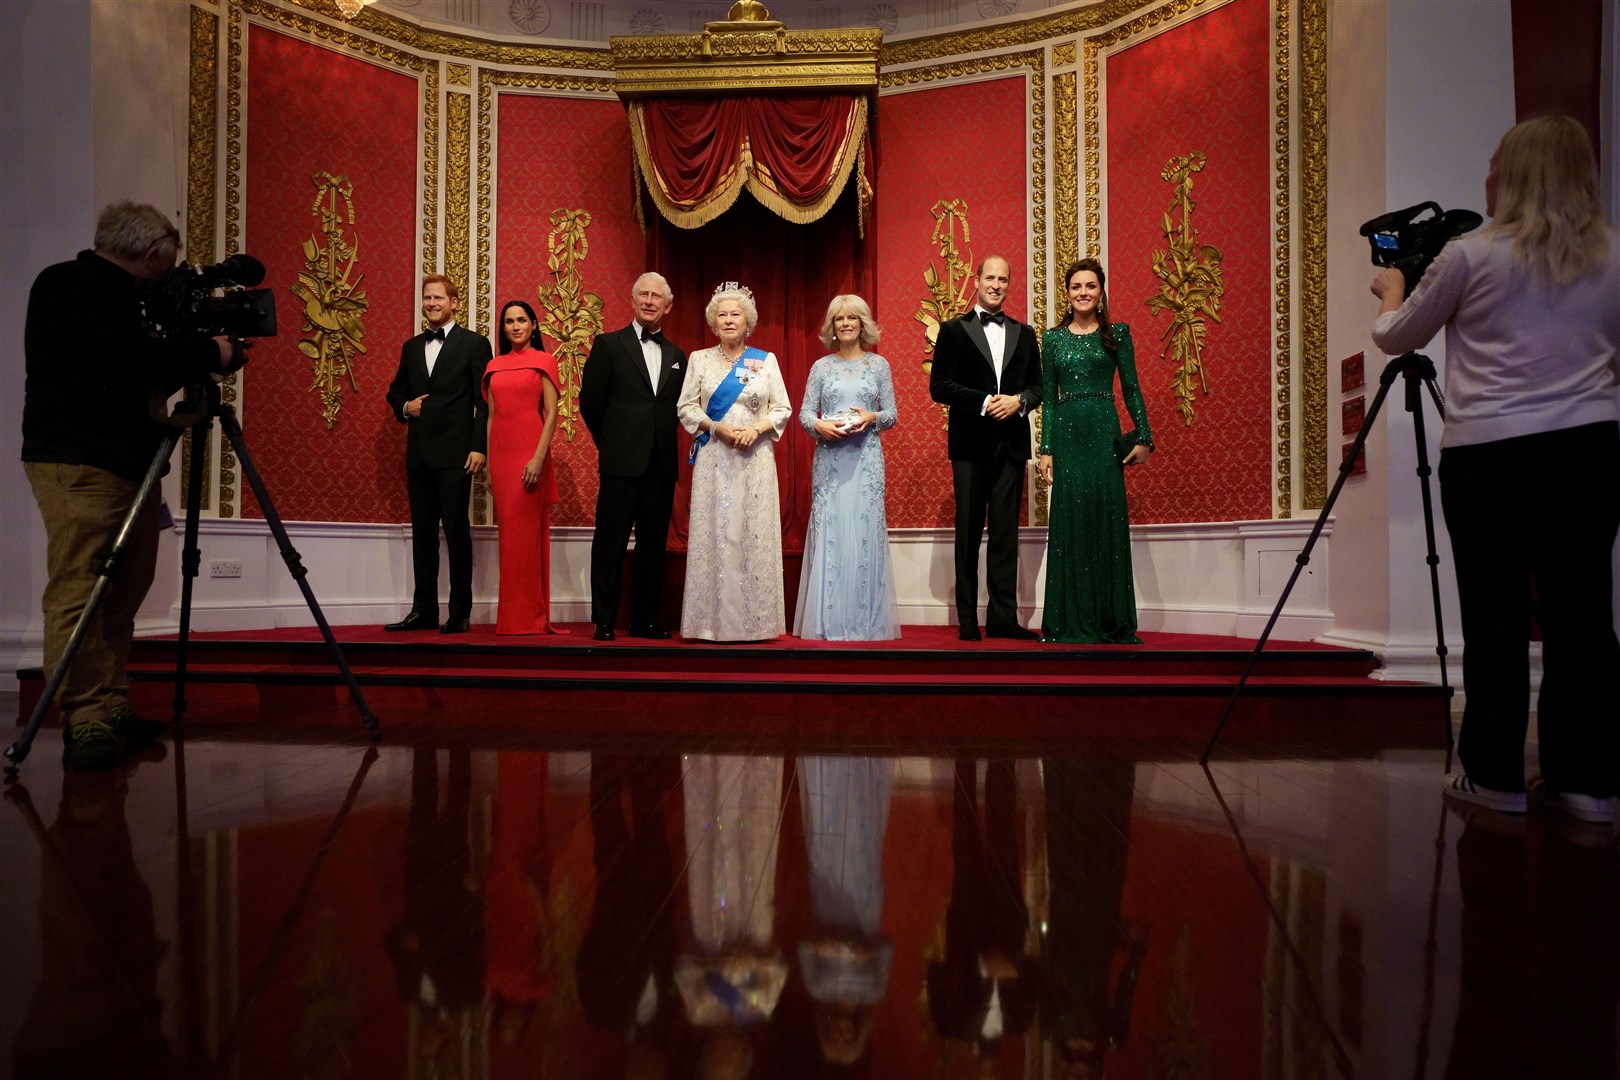 Wax figures of Queen Elizabeth II and members of the royal family at Madame Tussauds London ahead the Platinum Jubilee celebrations. (PA)